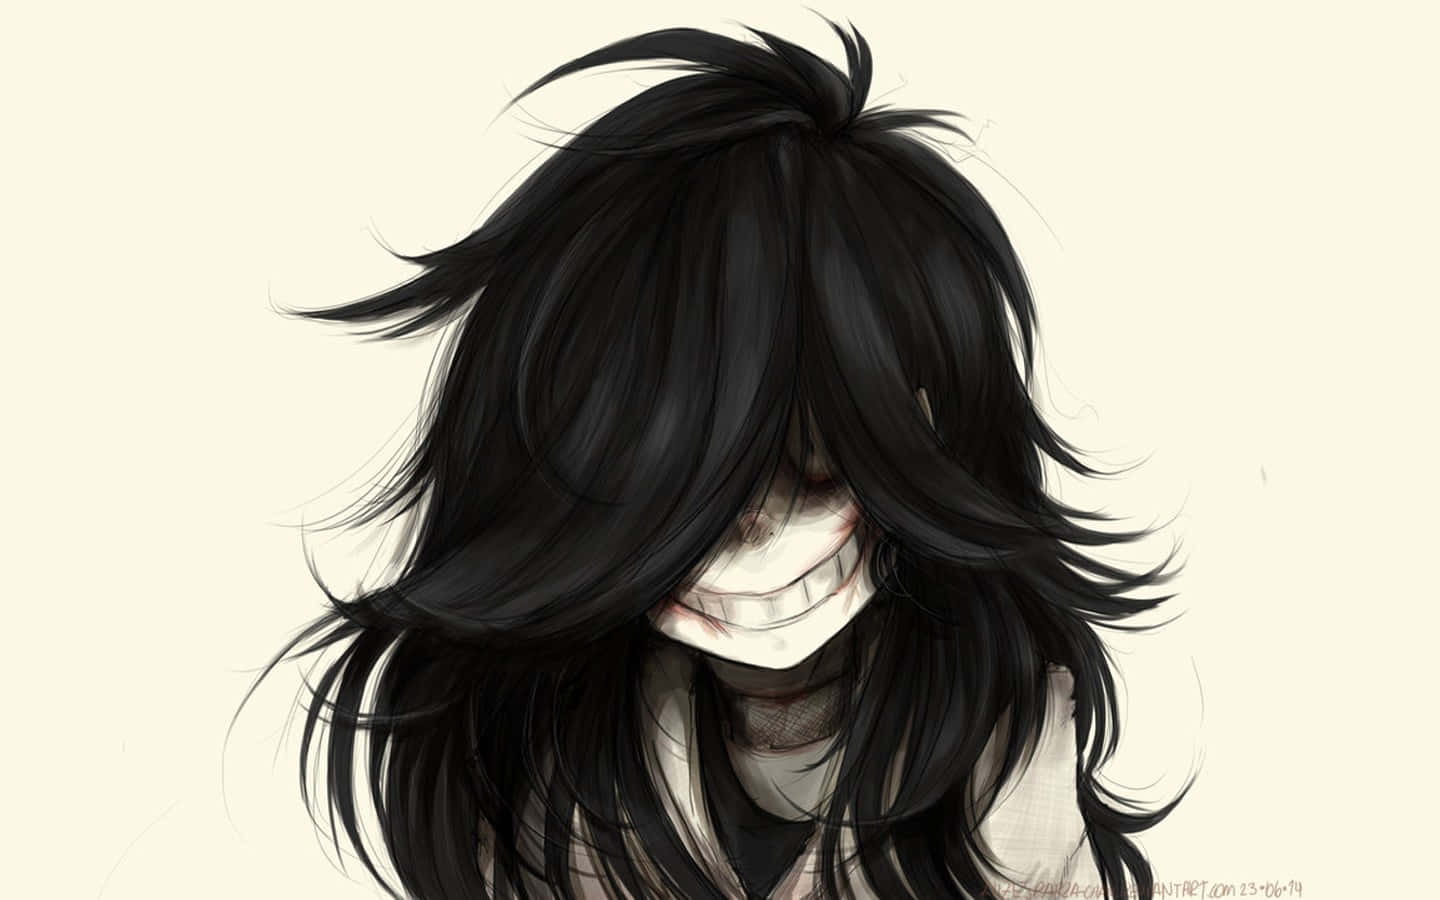 A Chilling Portrait of Jeff The Killer